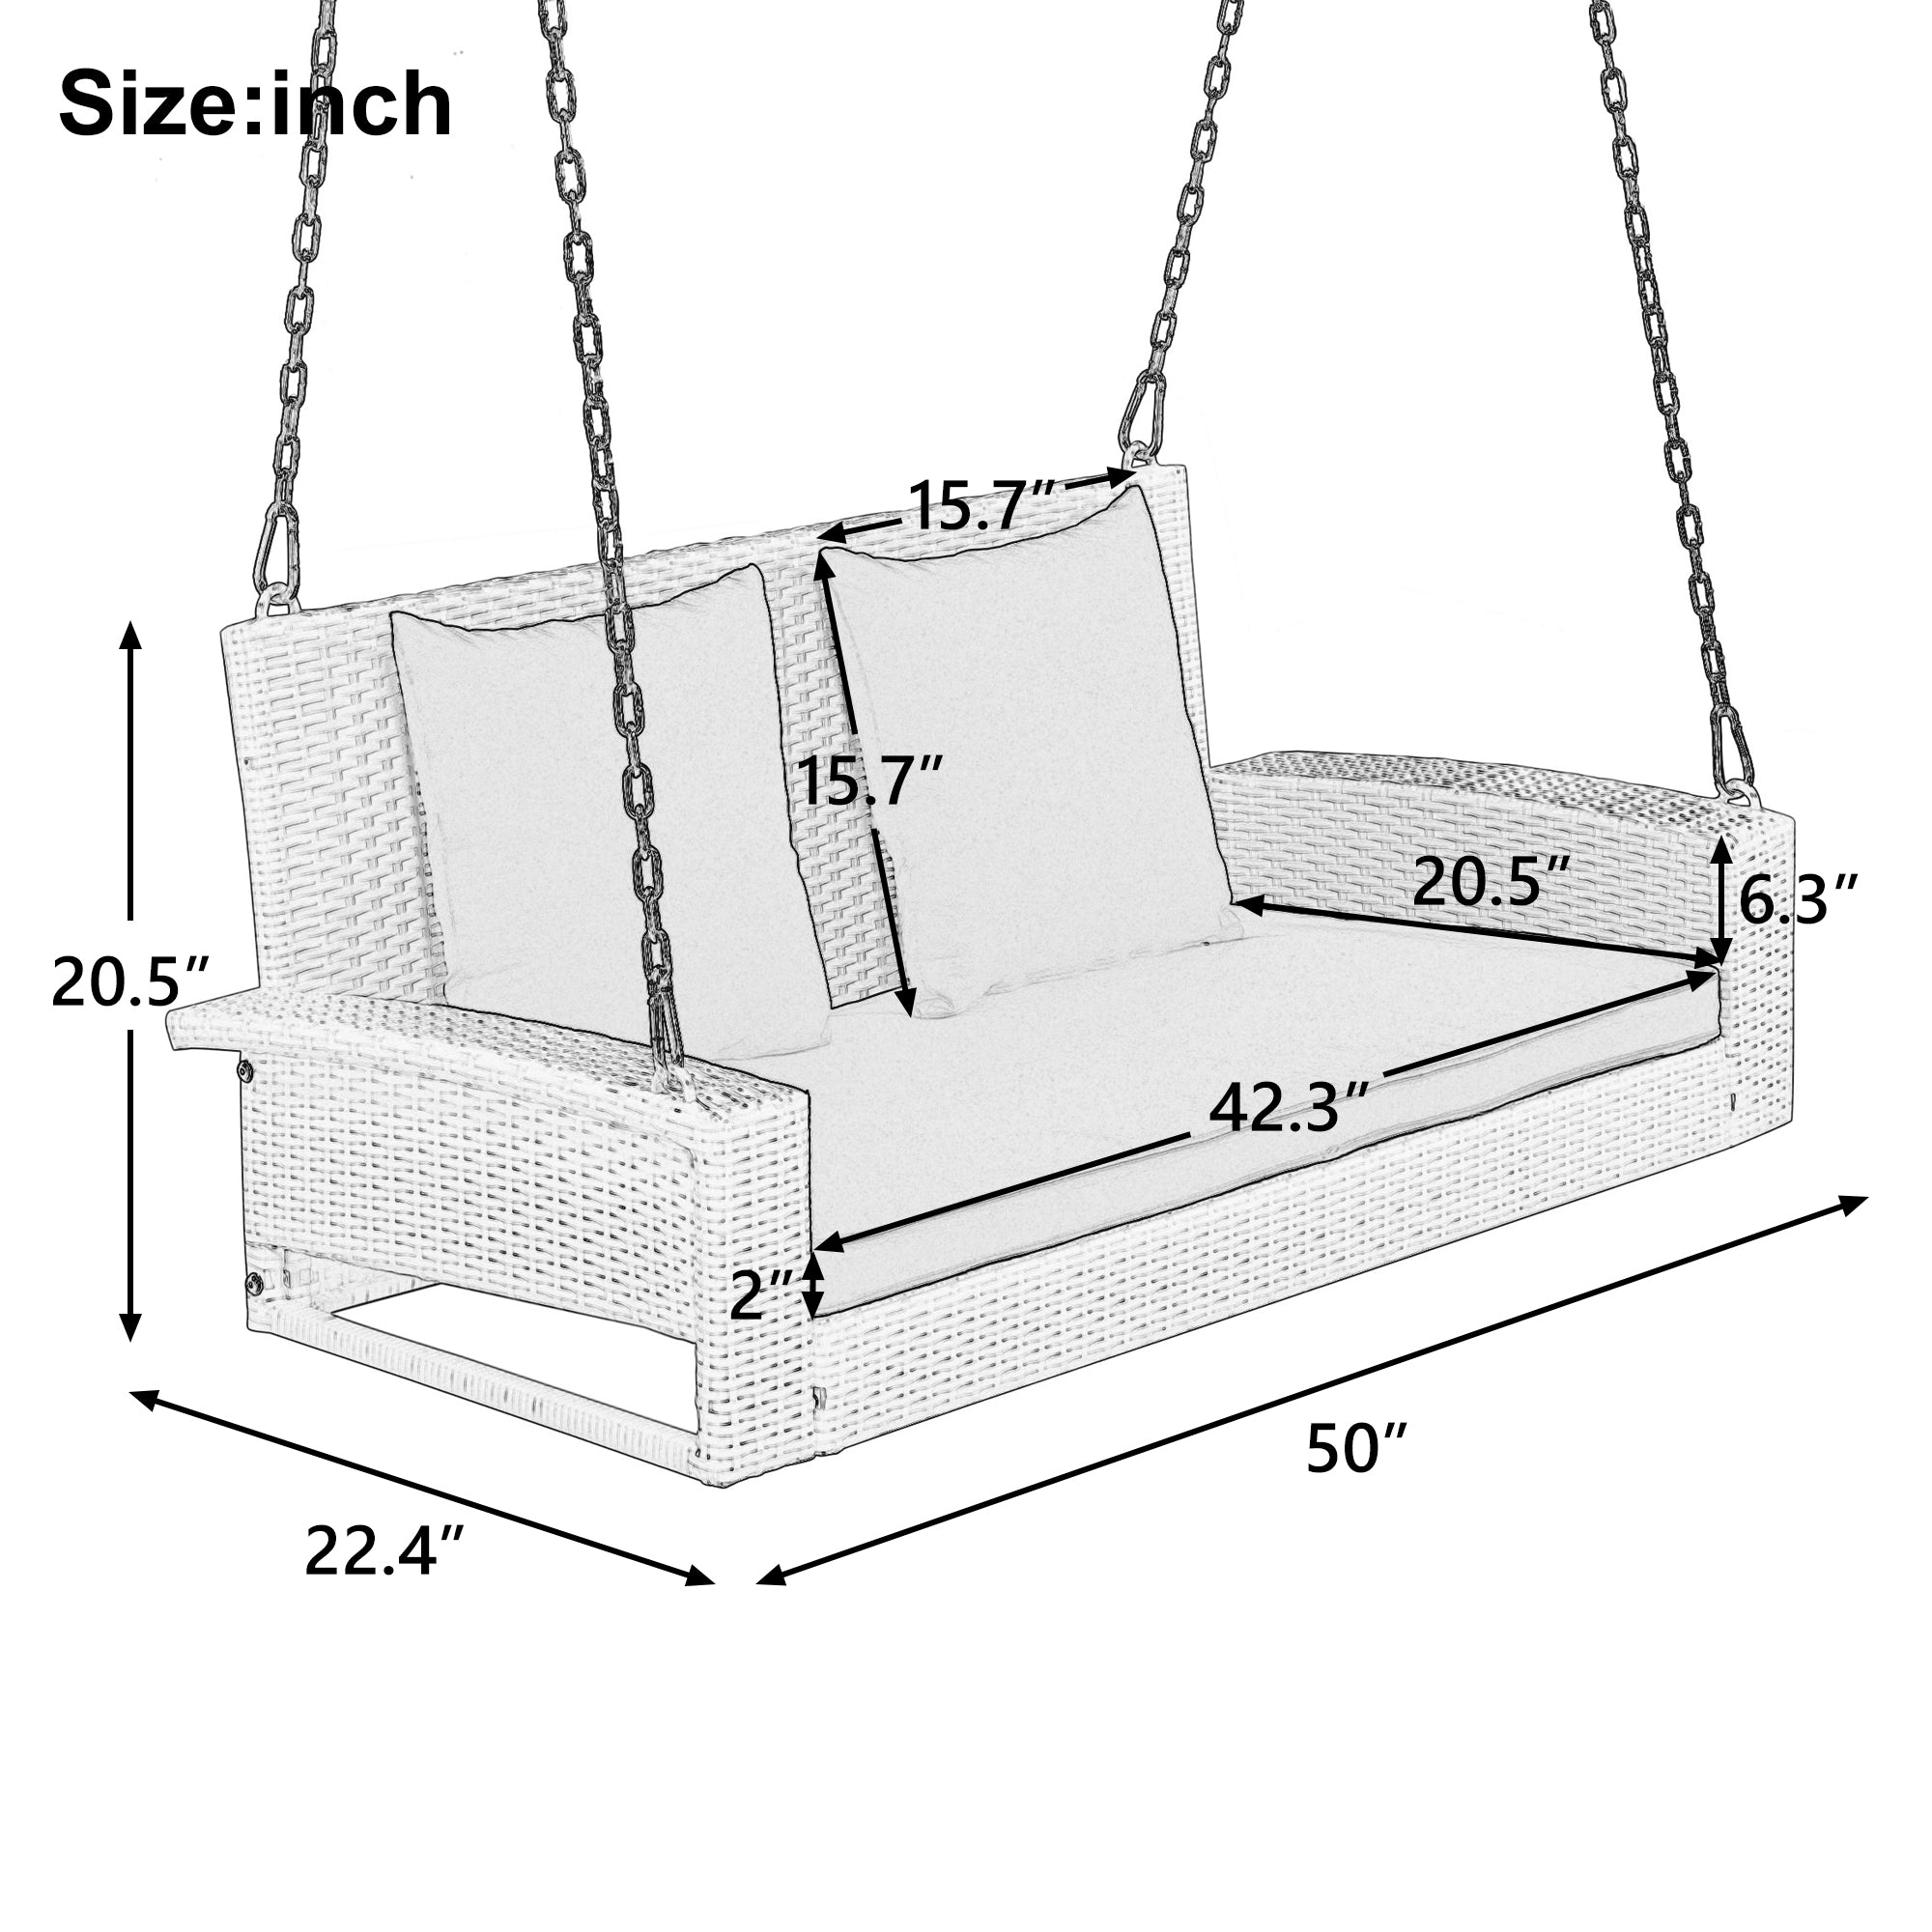 ZNTS GO 2-Person Wicker Hanging Porch Swing with Chains, Cushion, Pillow, Rattan Swing Bench for Garden, WF301718AAJ